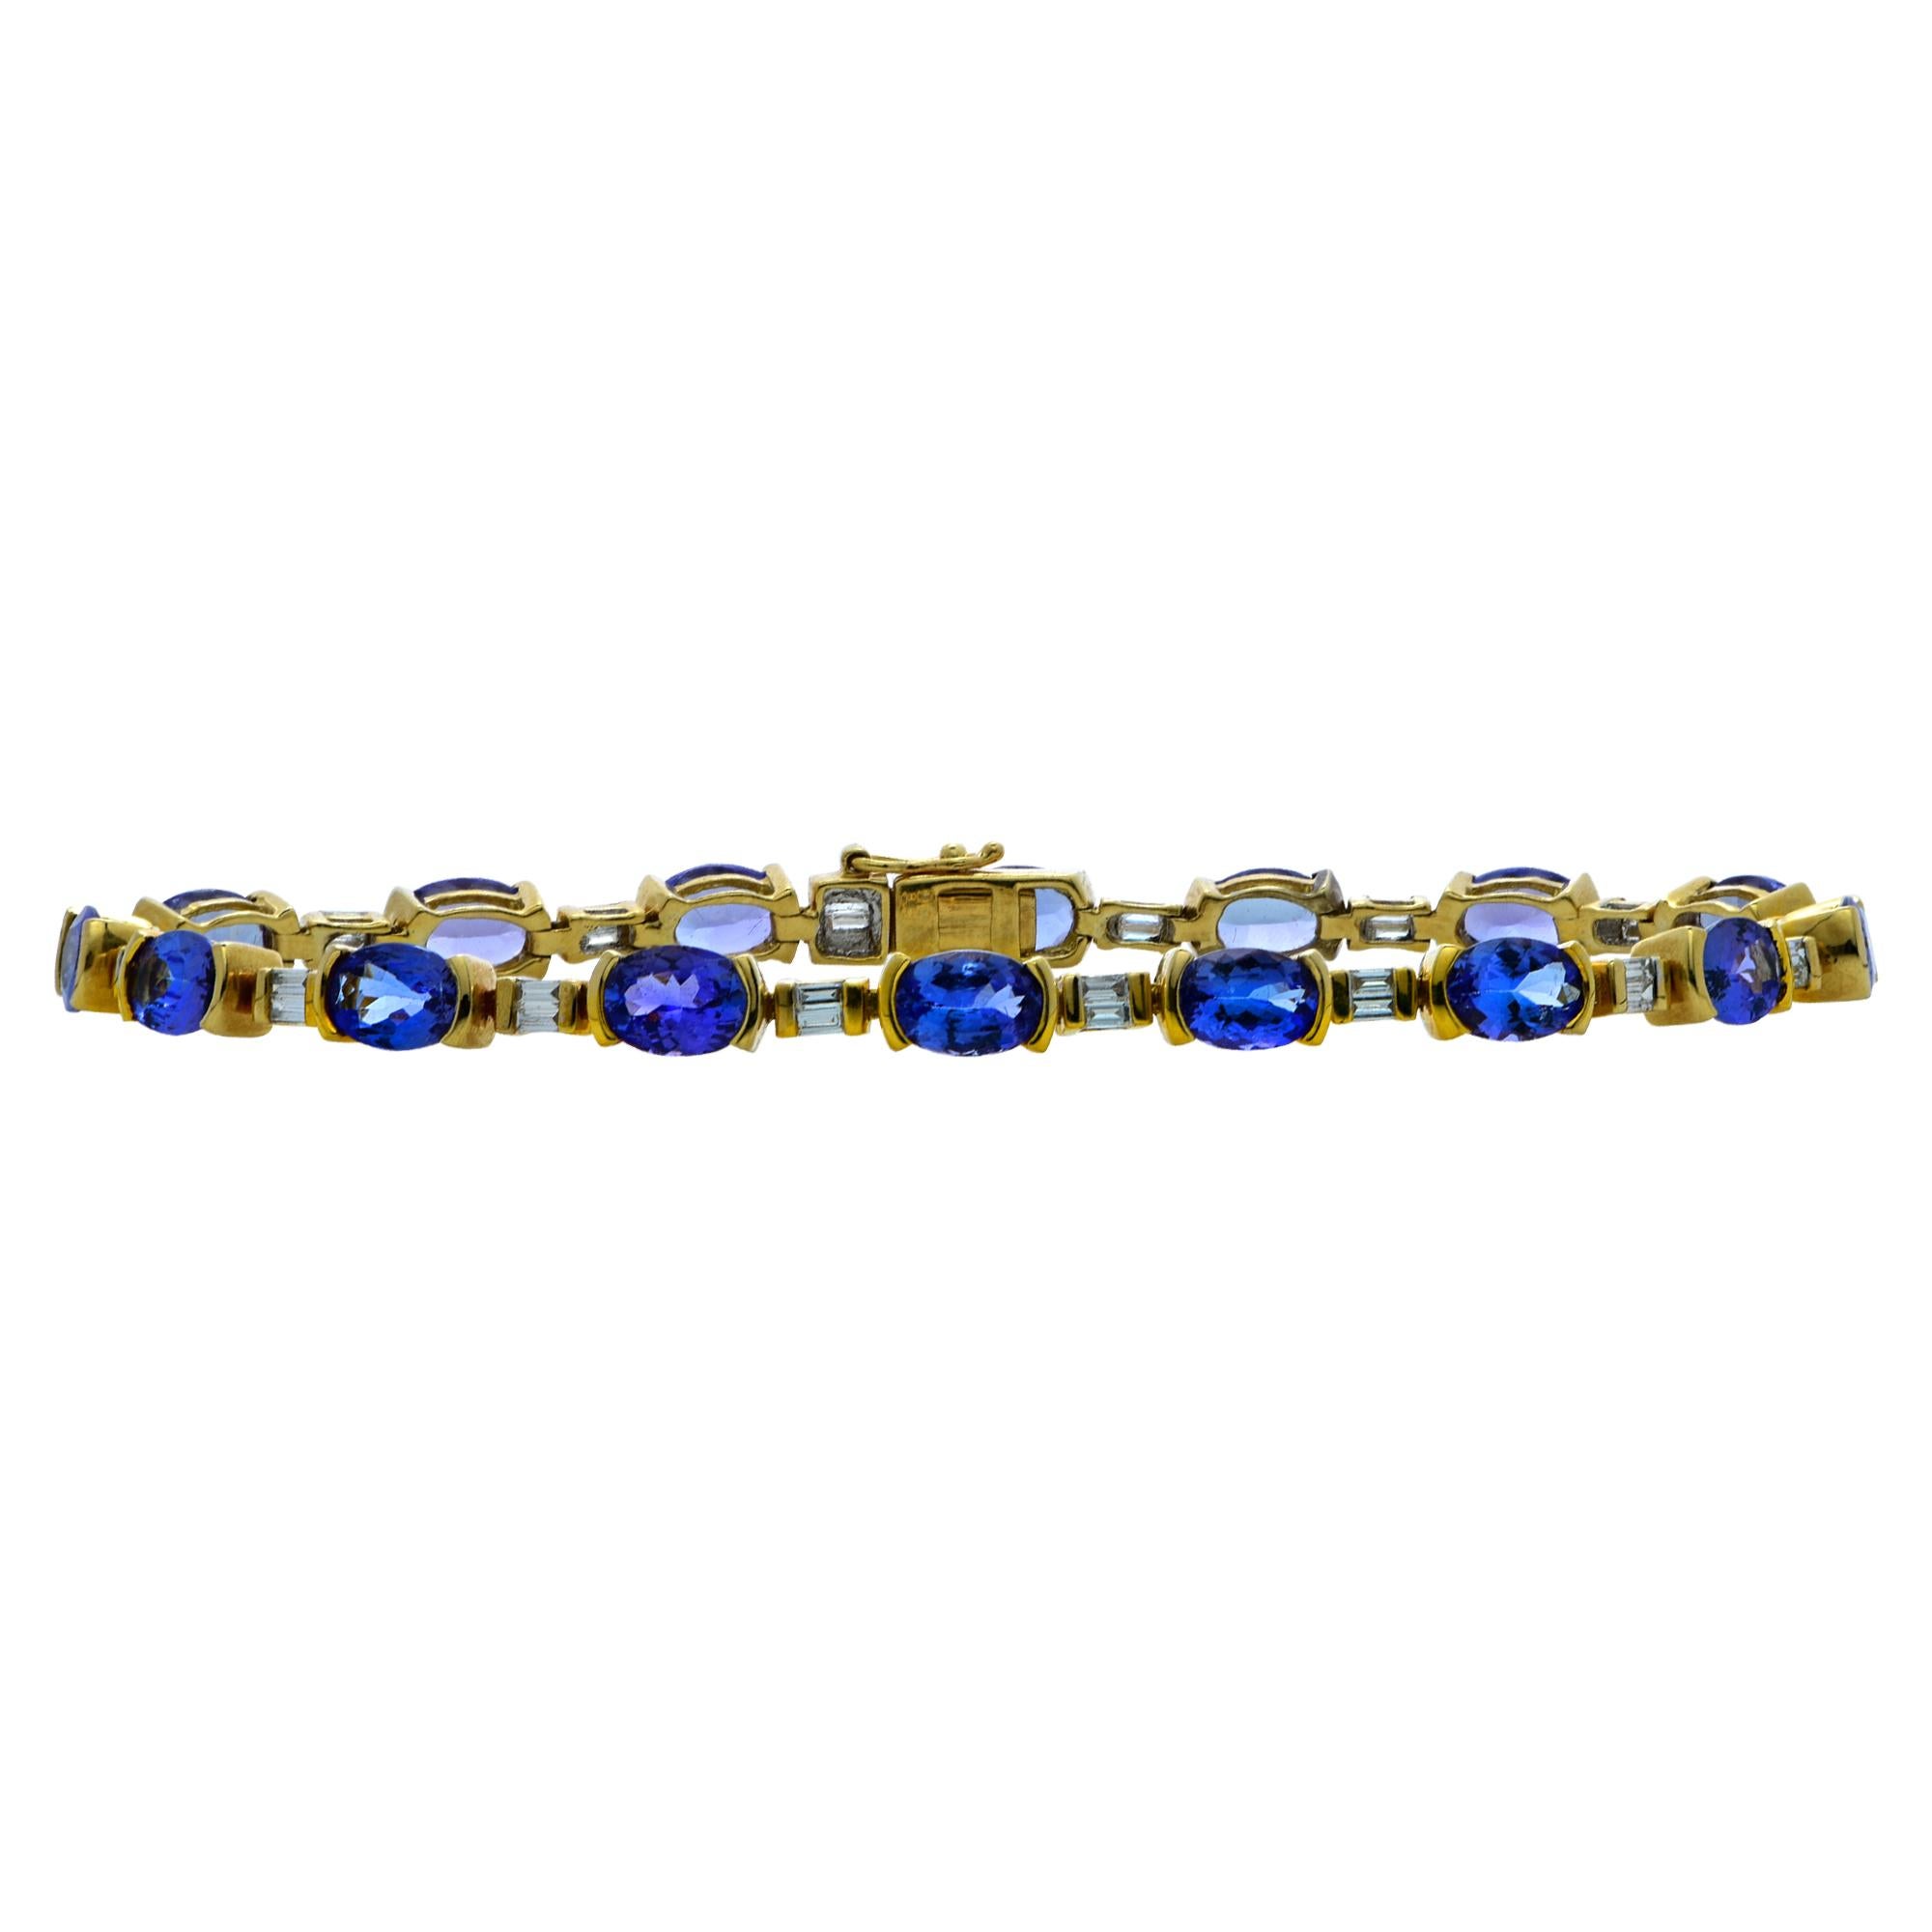 Striking bracelet crafted in 18 karat yellow gold showcasing 16 oval shape tanzanites weighing approximately 8 carats total and 32 baguette cut diamonds weighing approximately .80 carats total. The diamonds and tanzanites are set in an alternating